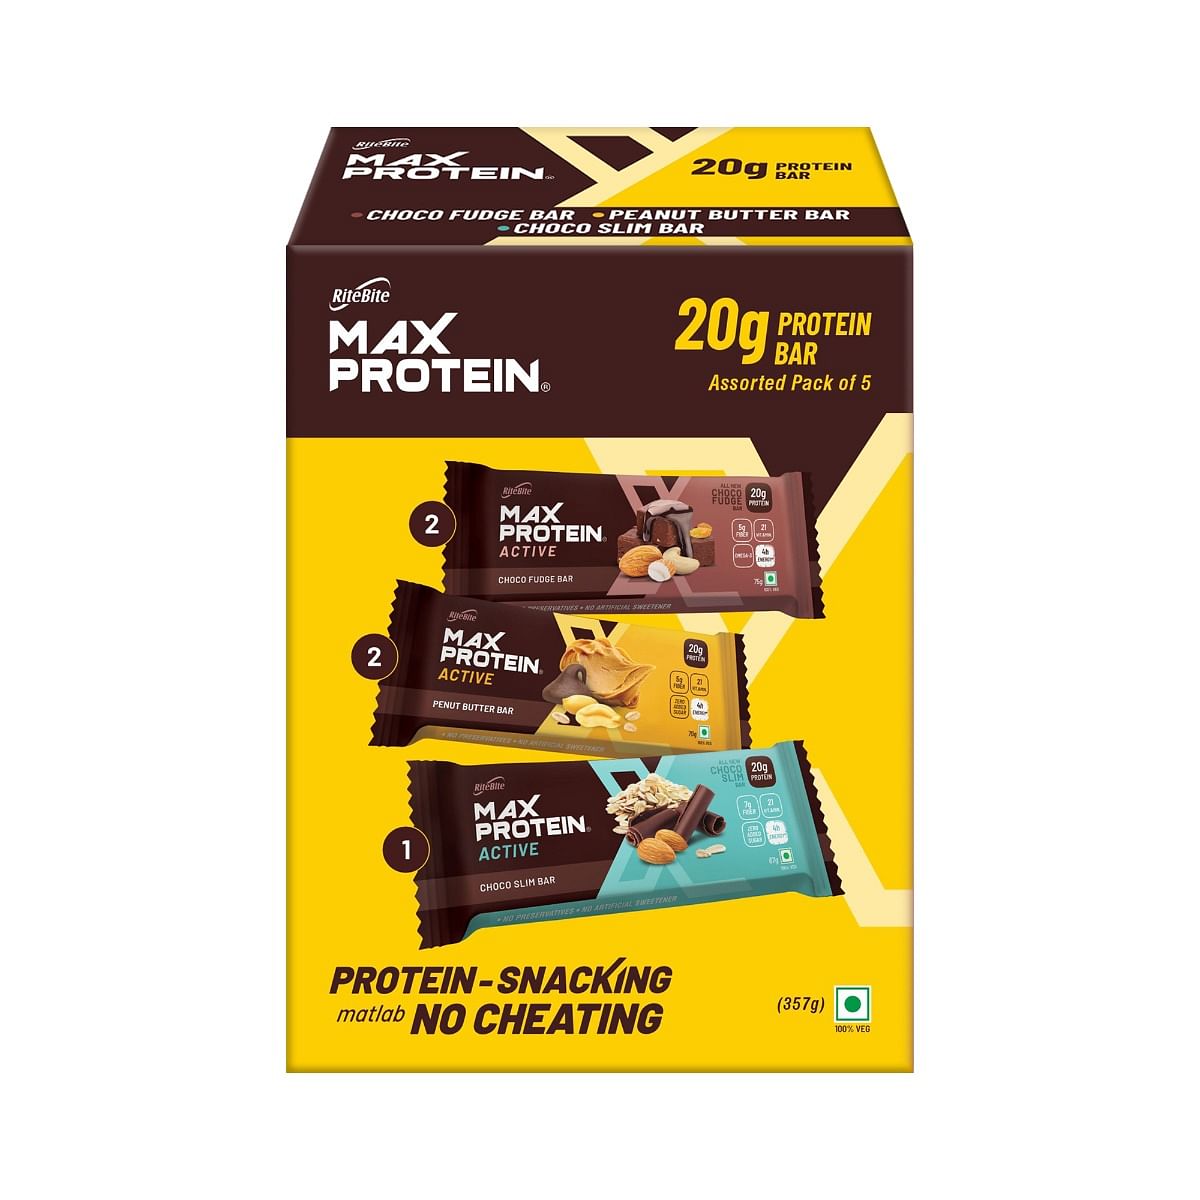 

RiteBite Max Protein Active Assorted 20g Protein Bars (Pack of 5) | 5g Fiber, 21 Vitamins & Minerals, 4h Energy | For Fitness, Immunity | No Preser...